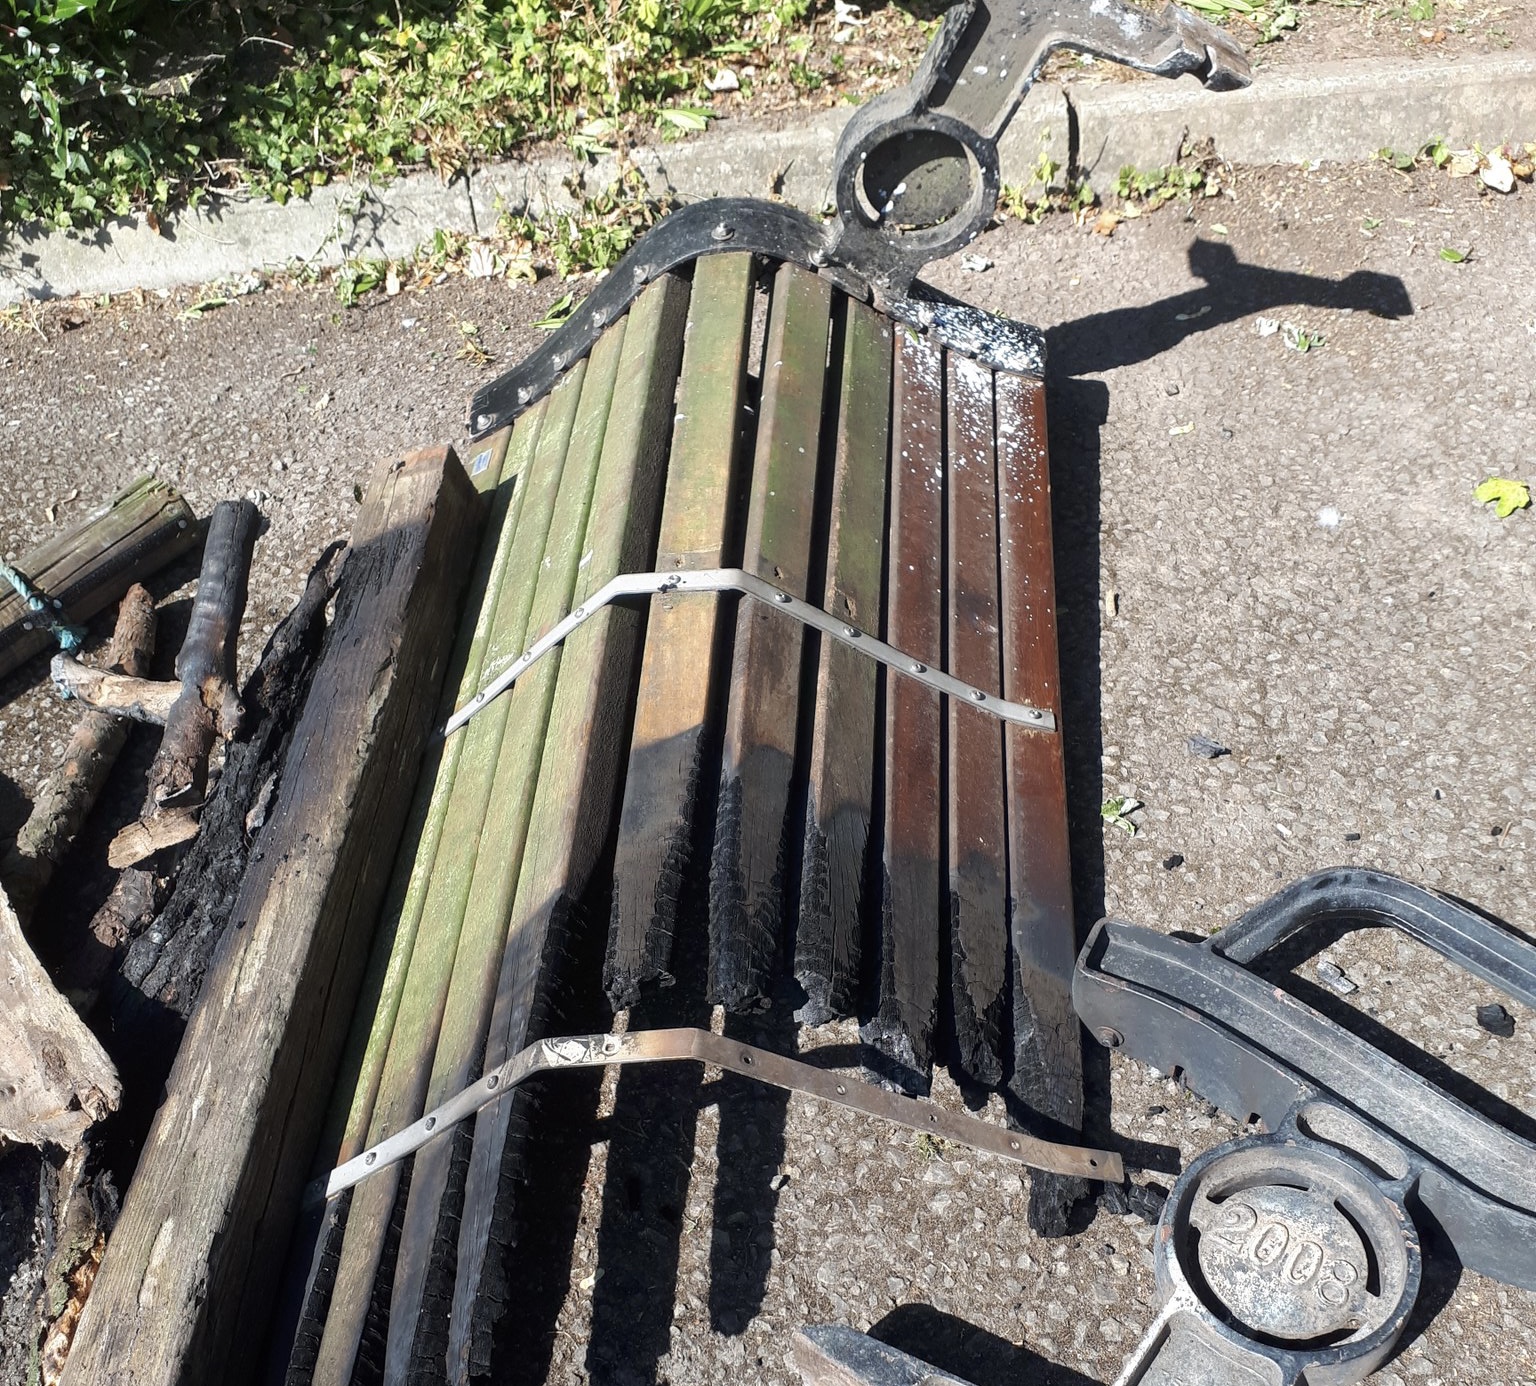 NEWS | Police appeal after a memorial bench was destroyed in an arson attack in Herefordshire